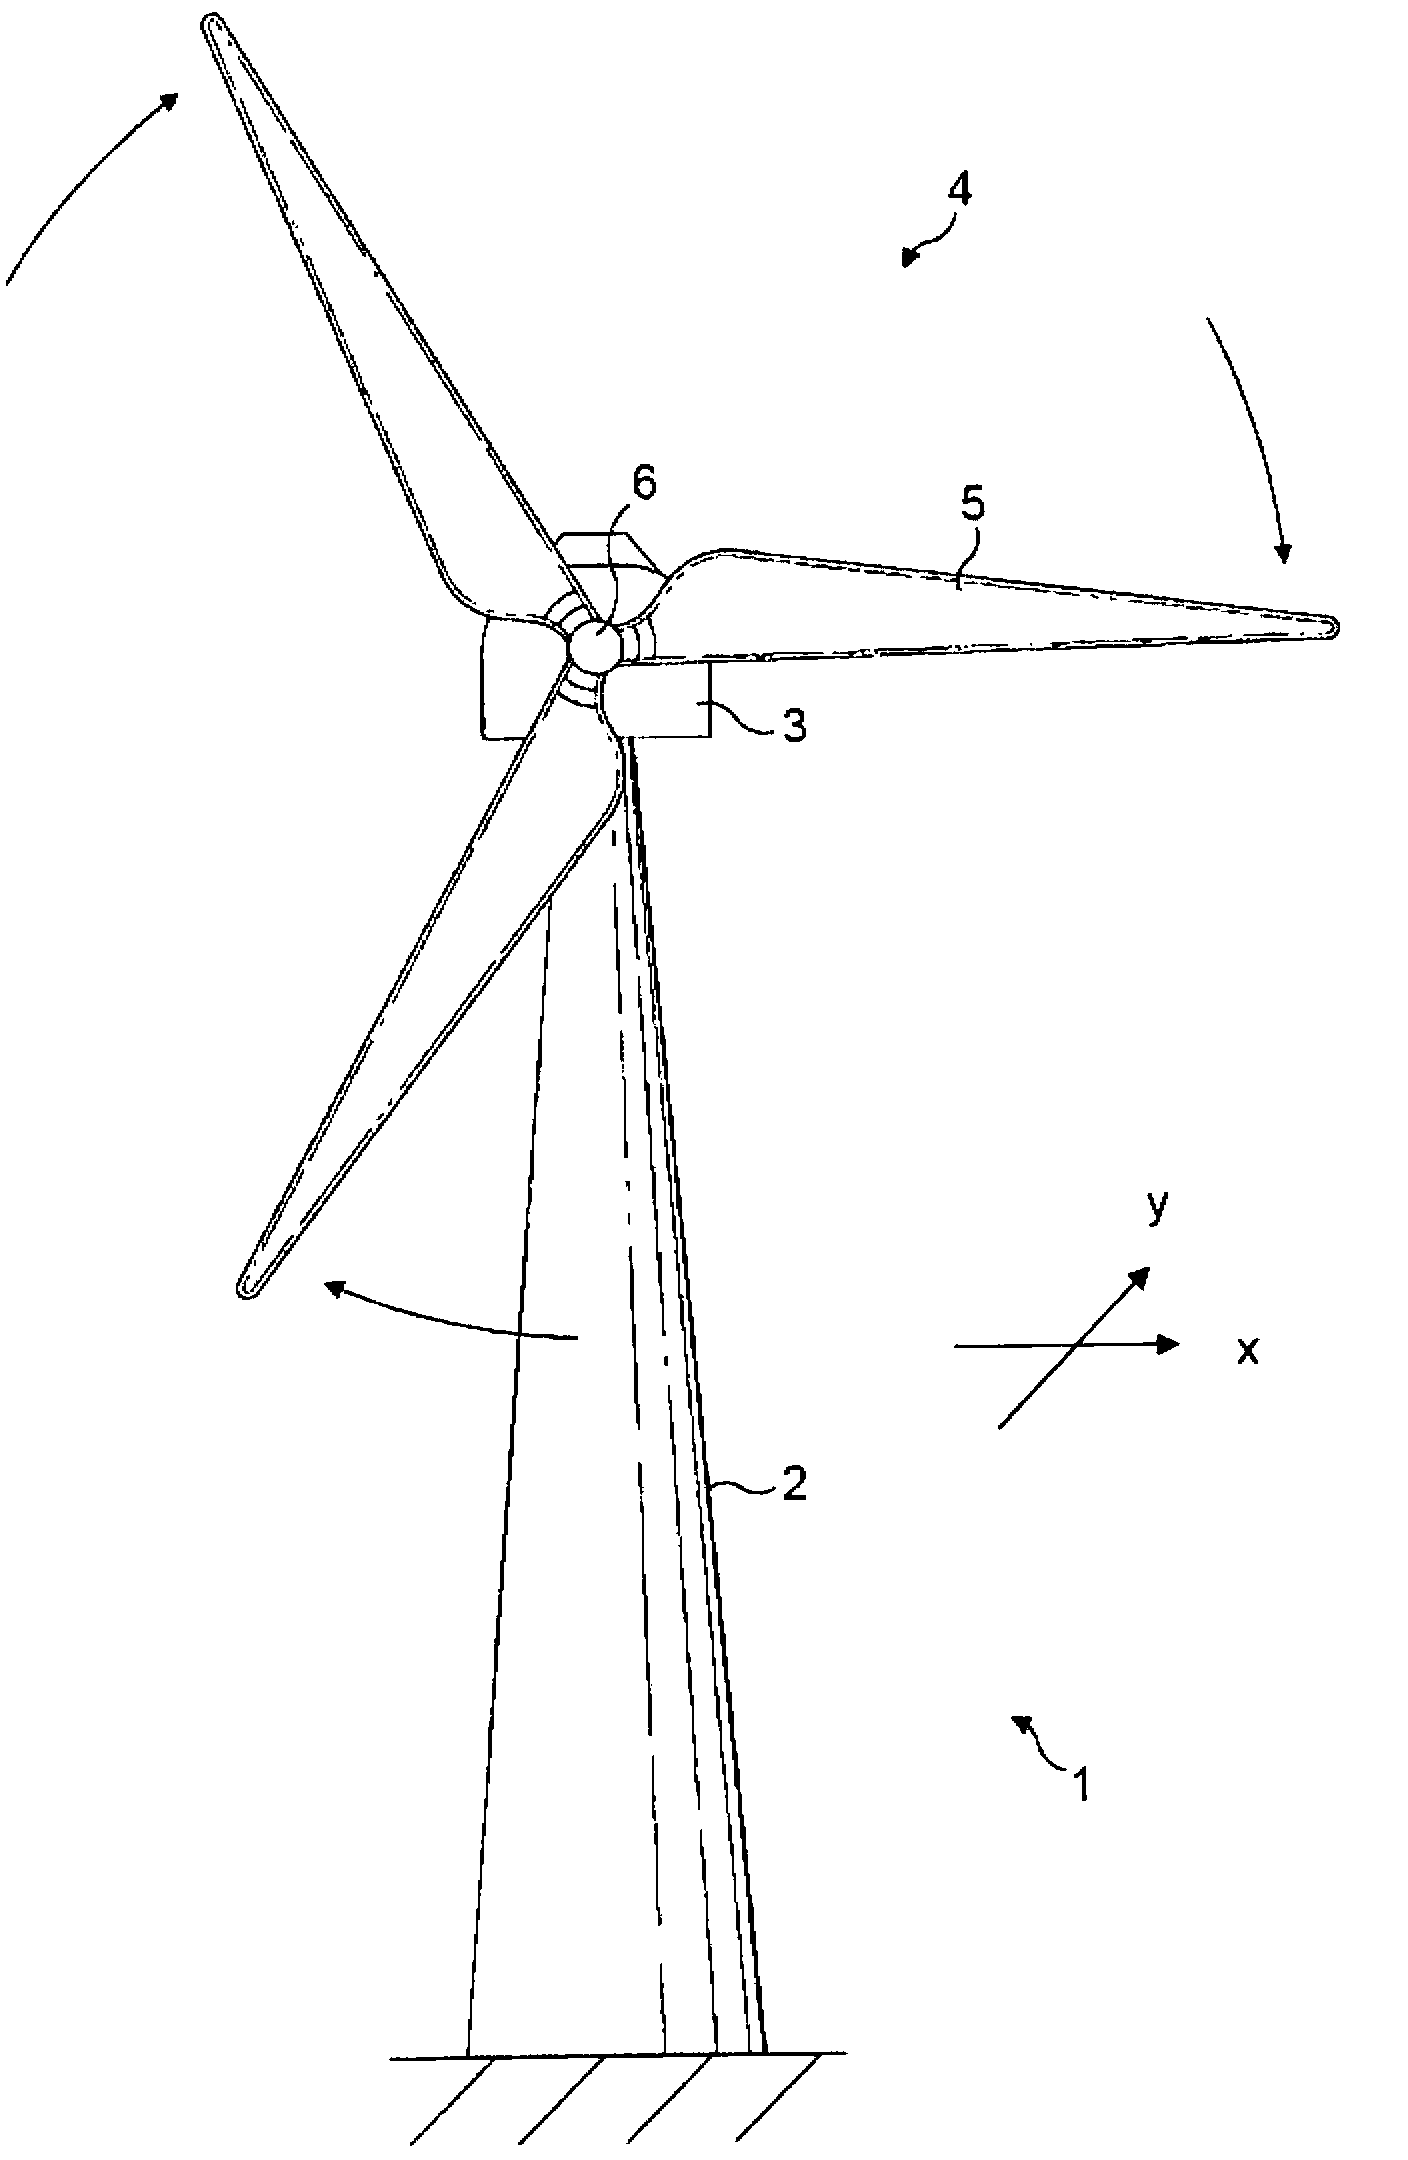 A system and method for identifying the likelihood of a tower strike in a wind turbine